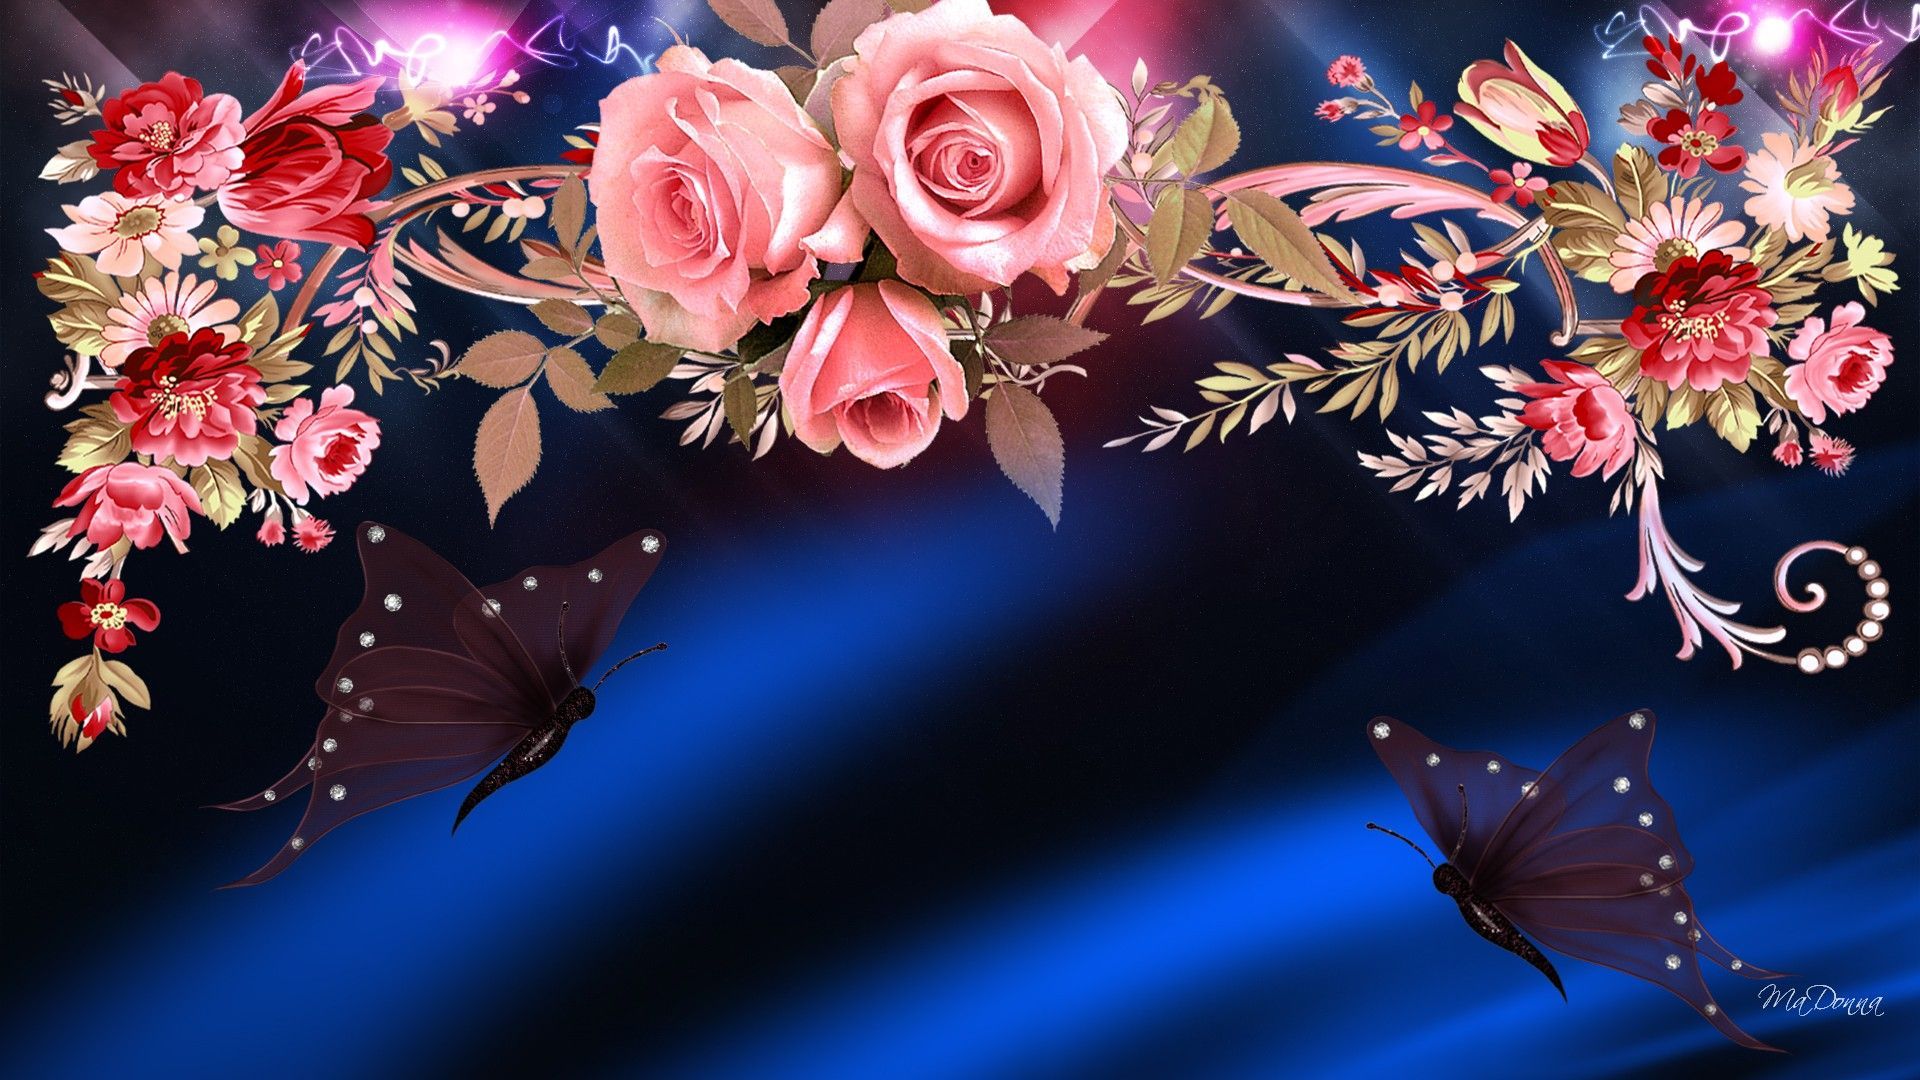 Roses And Butterflies Wallpaper On